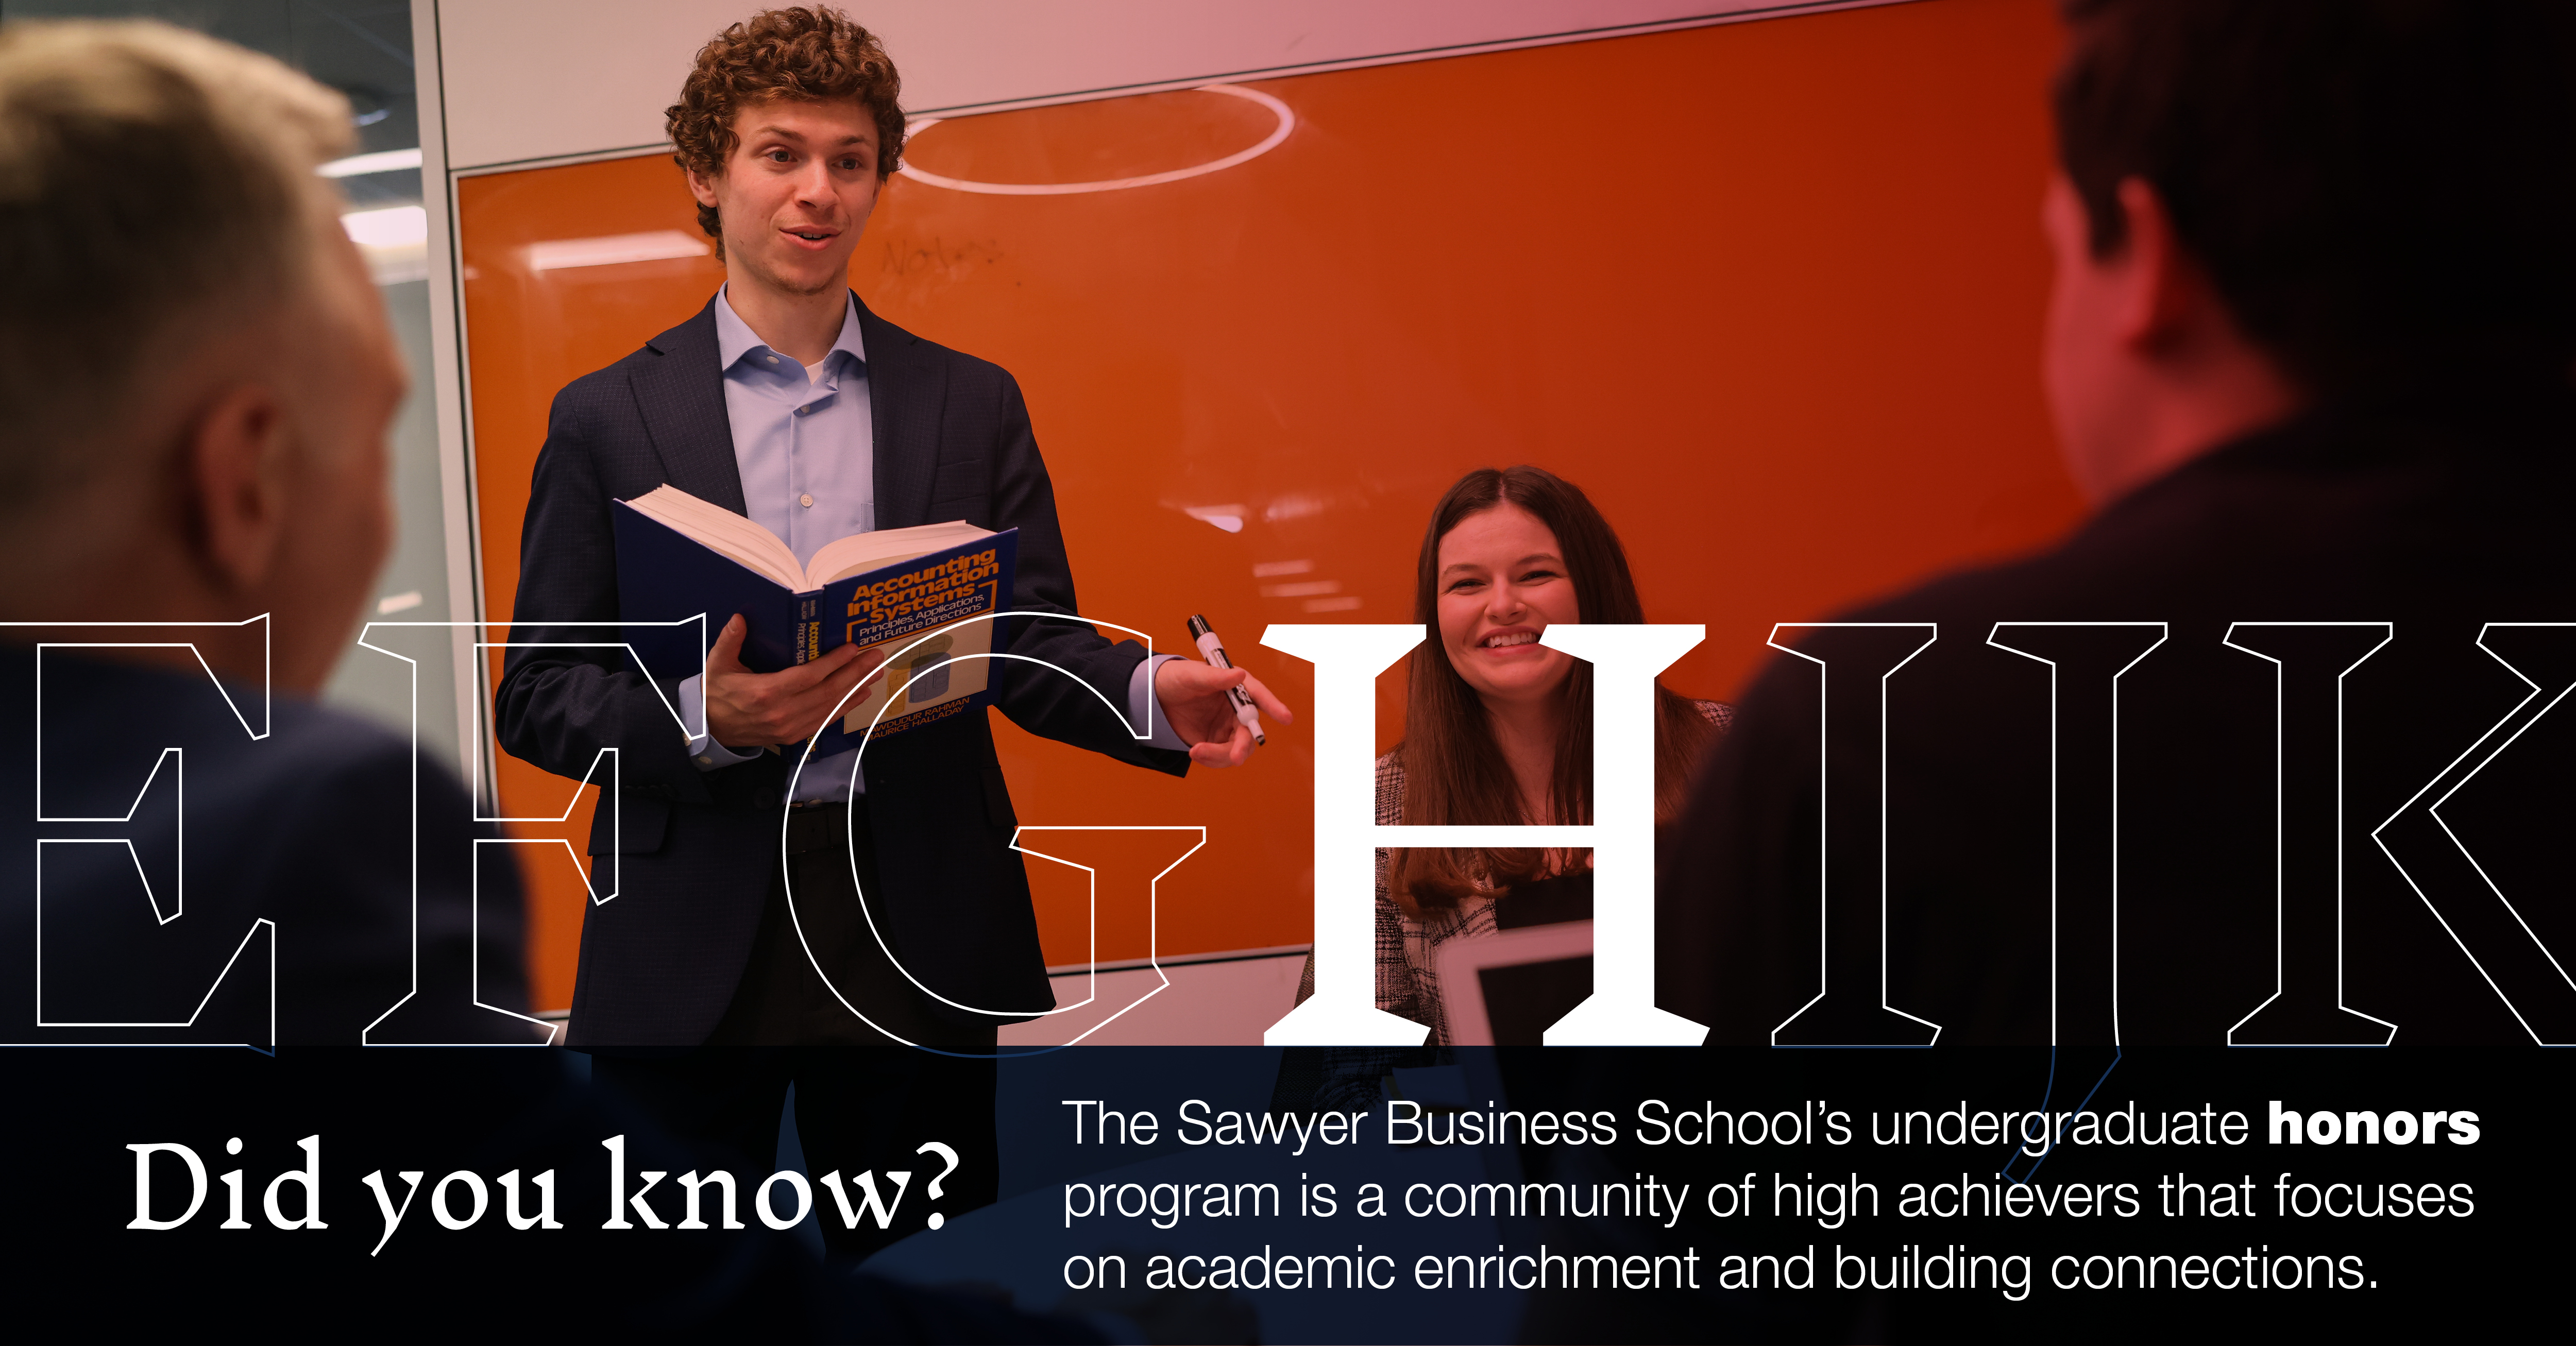 H: [image of honors accounting students in a discussion group]: Did you know that the Sawyer Business School's undergraduate Honors is a community of high achievers that focuses on academic enrichment and building connections?